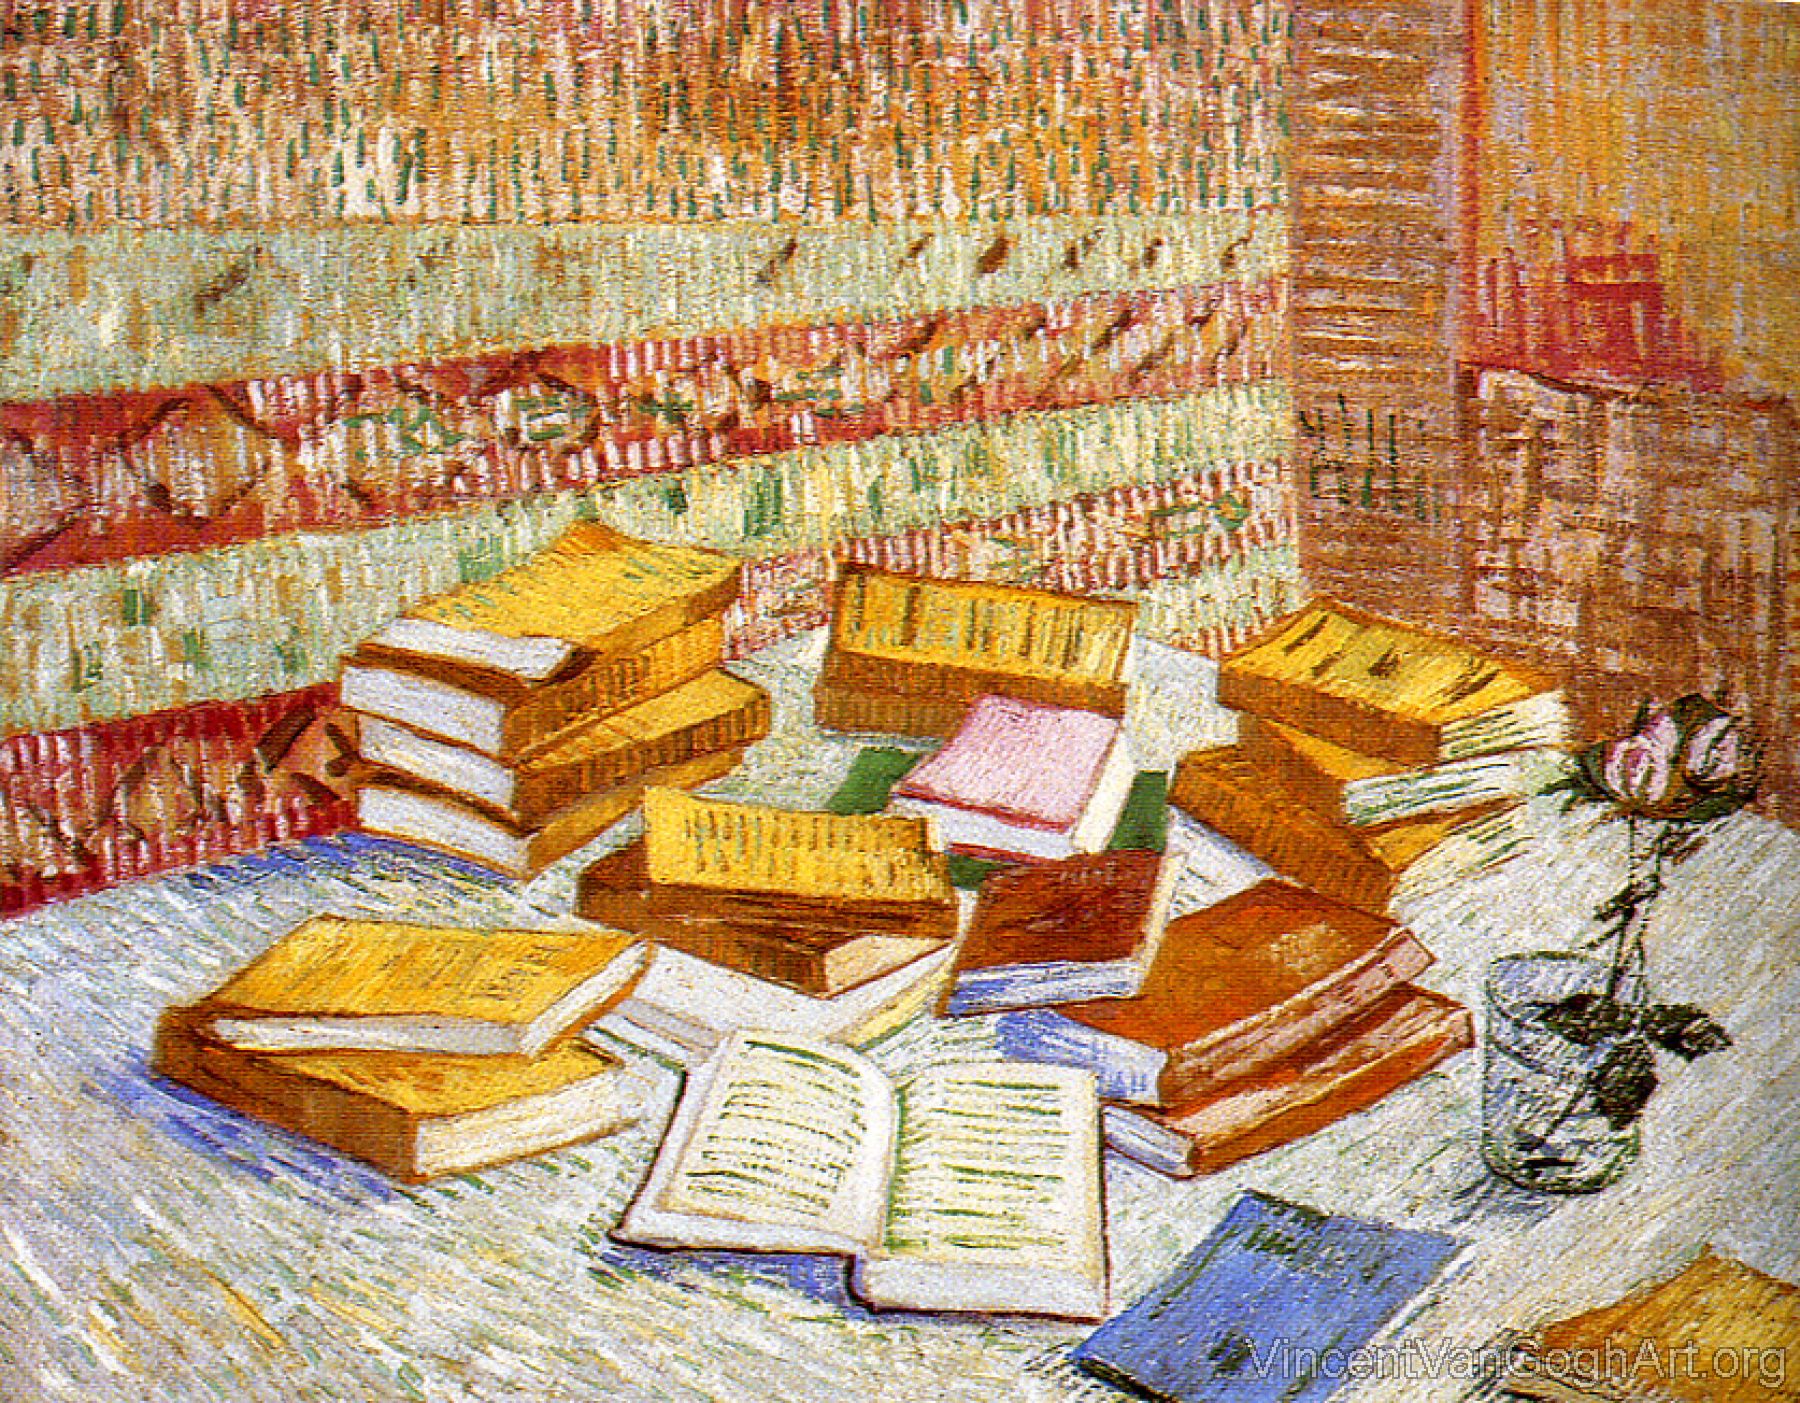 Piles of French Novels and a Glass with a Rose(Romans Parisiens)